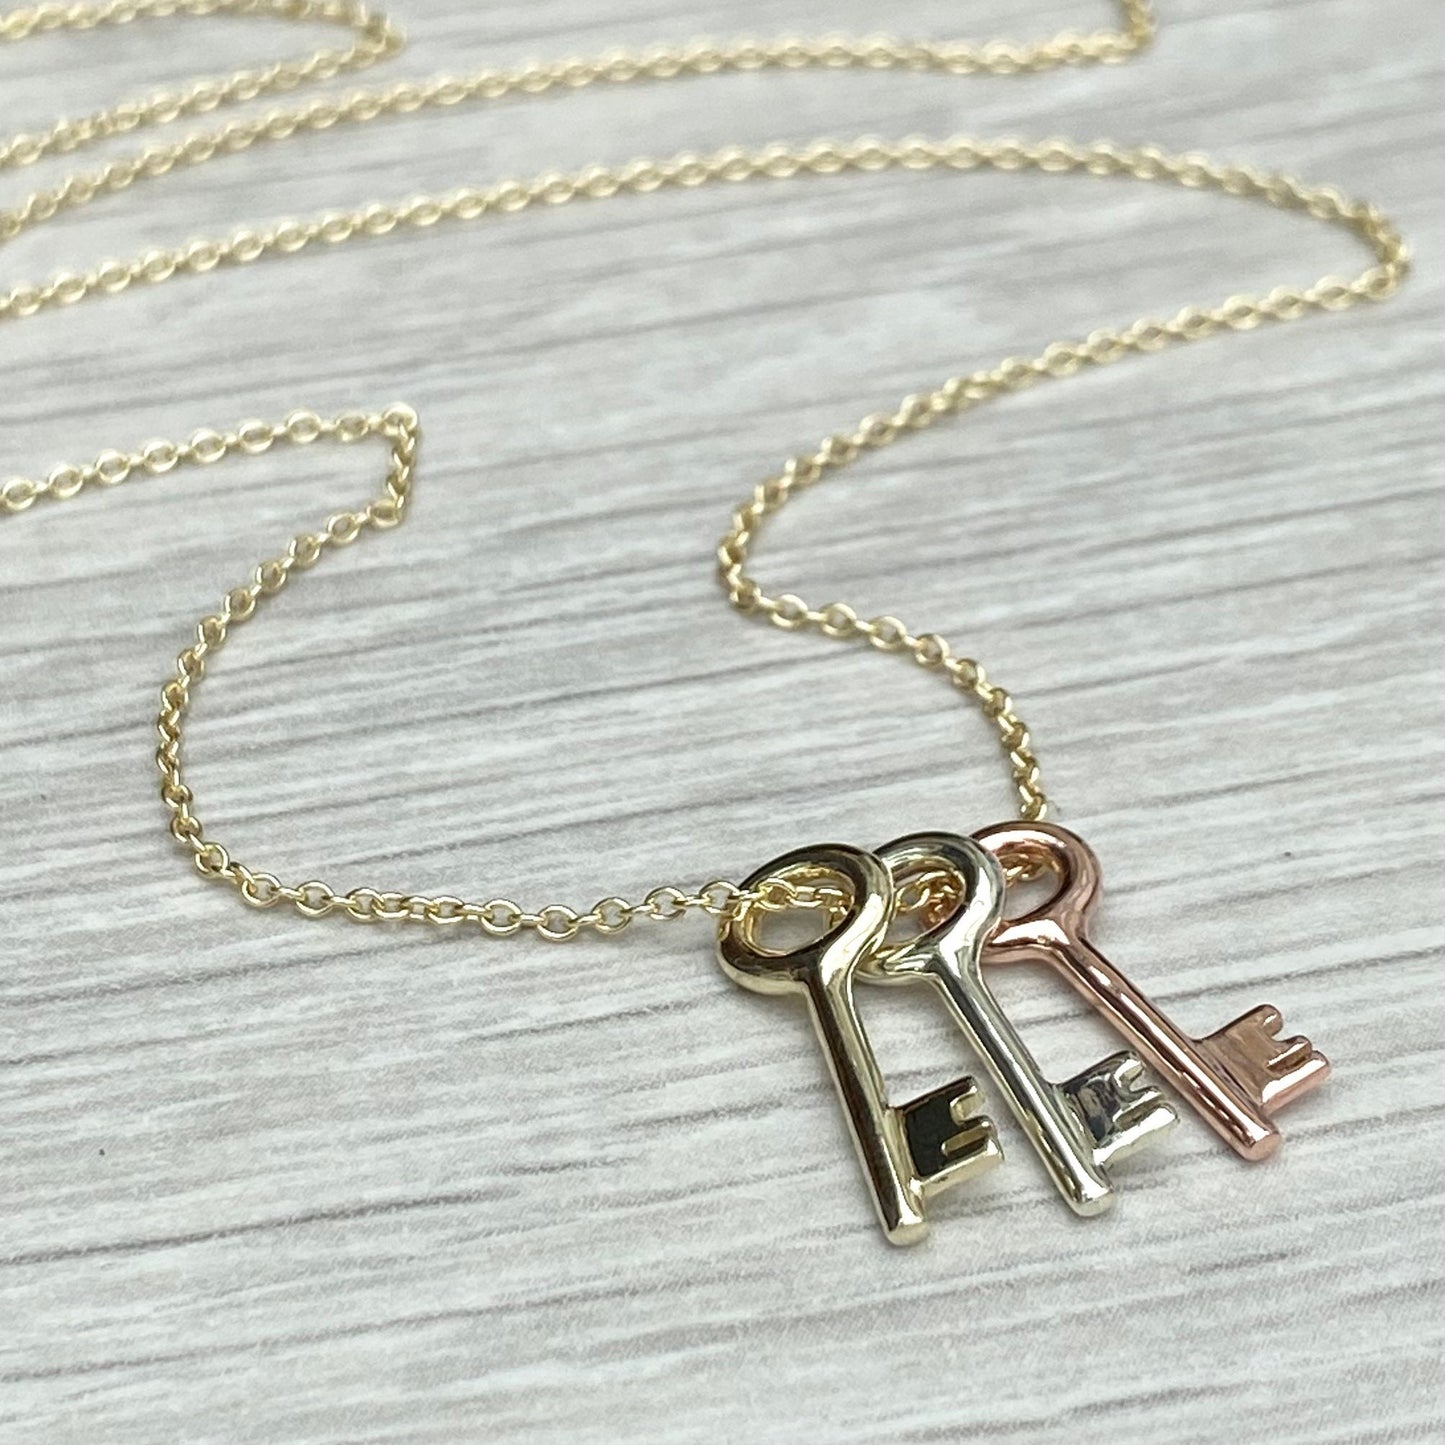 9ct solid yellow, white and rose gold small key pendants and 9ct yellow gold trace chain